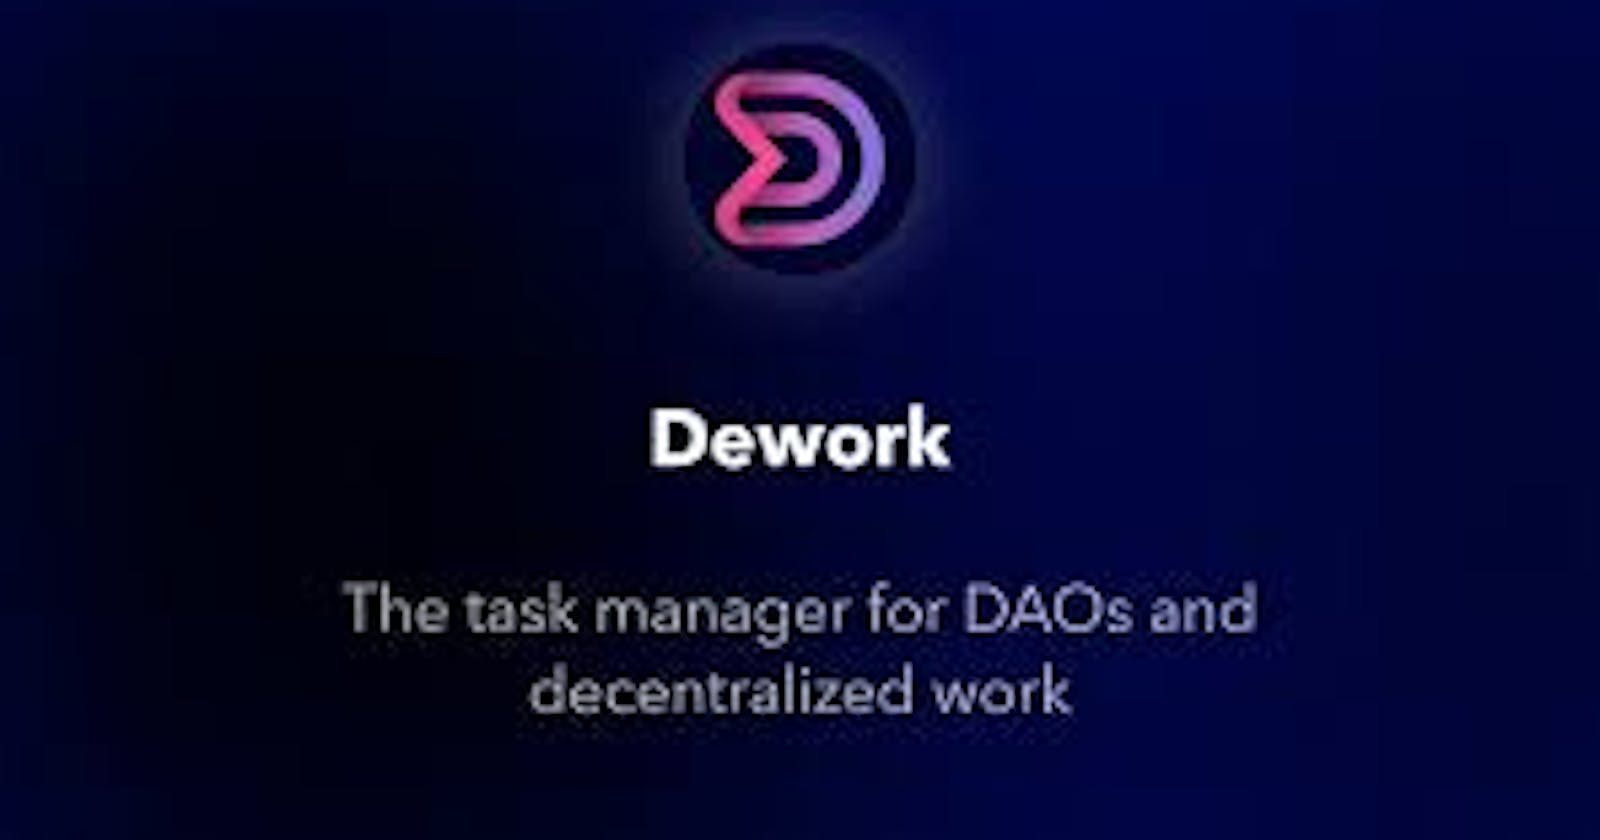 Dework: The Task Manager for DAOs and Decentralized Work